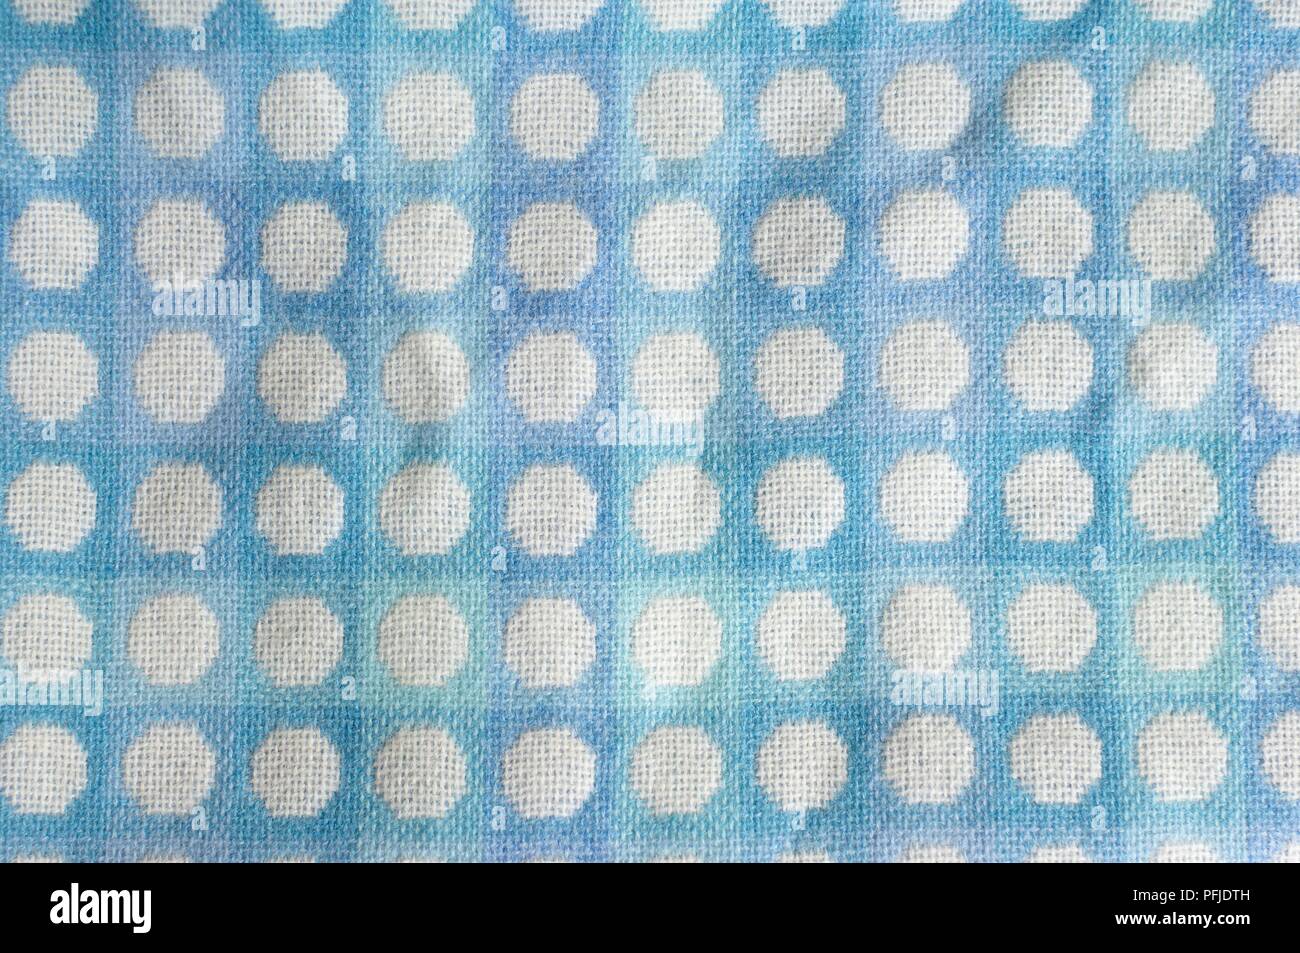 Patterned fabric, blue with white dots Stock Photo